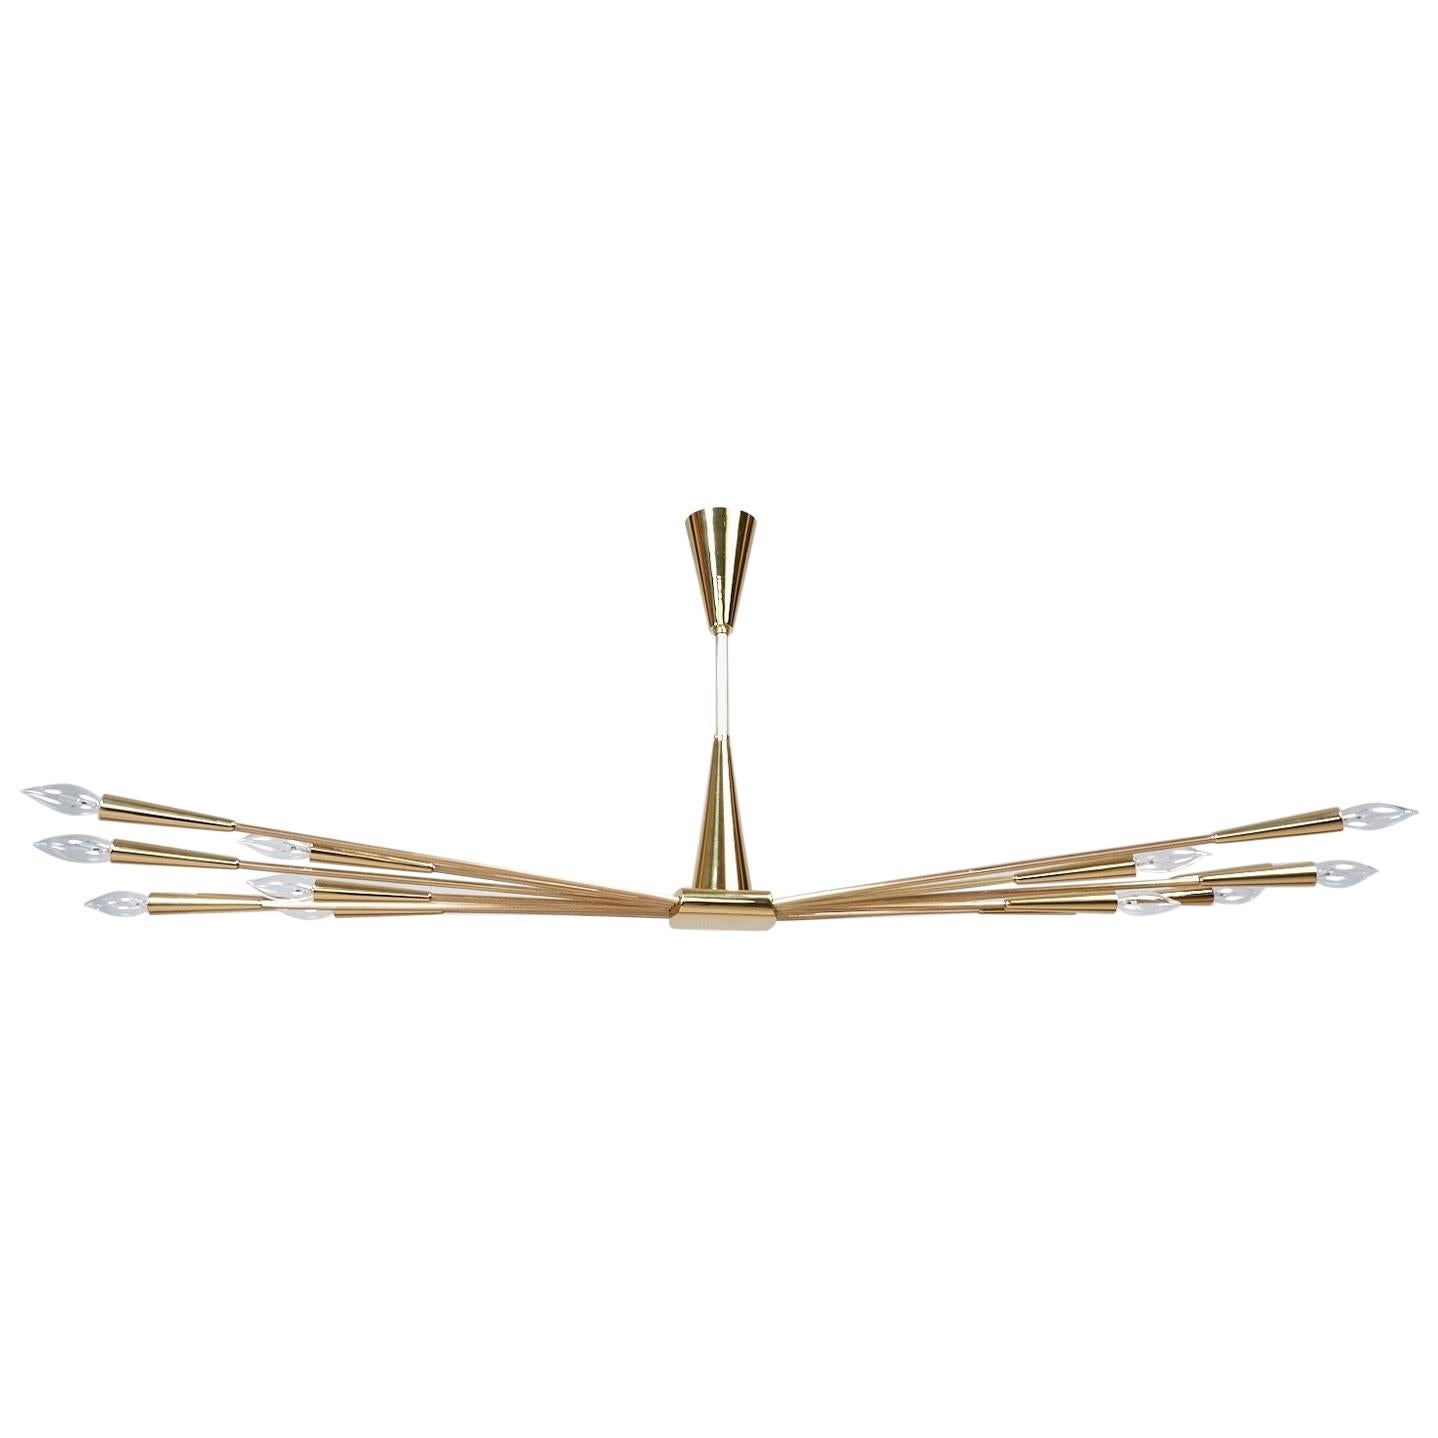 Oscar Torlasco (1934 - 2004) 

A stunning Sputnik chandelier by Oscar Torlasco in mirror-polished brass, with fourteen striated arms — alternating long and short — extending dramatically from a central rhombus with rounded edges, each culminating in